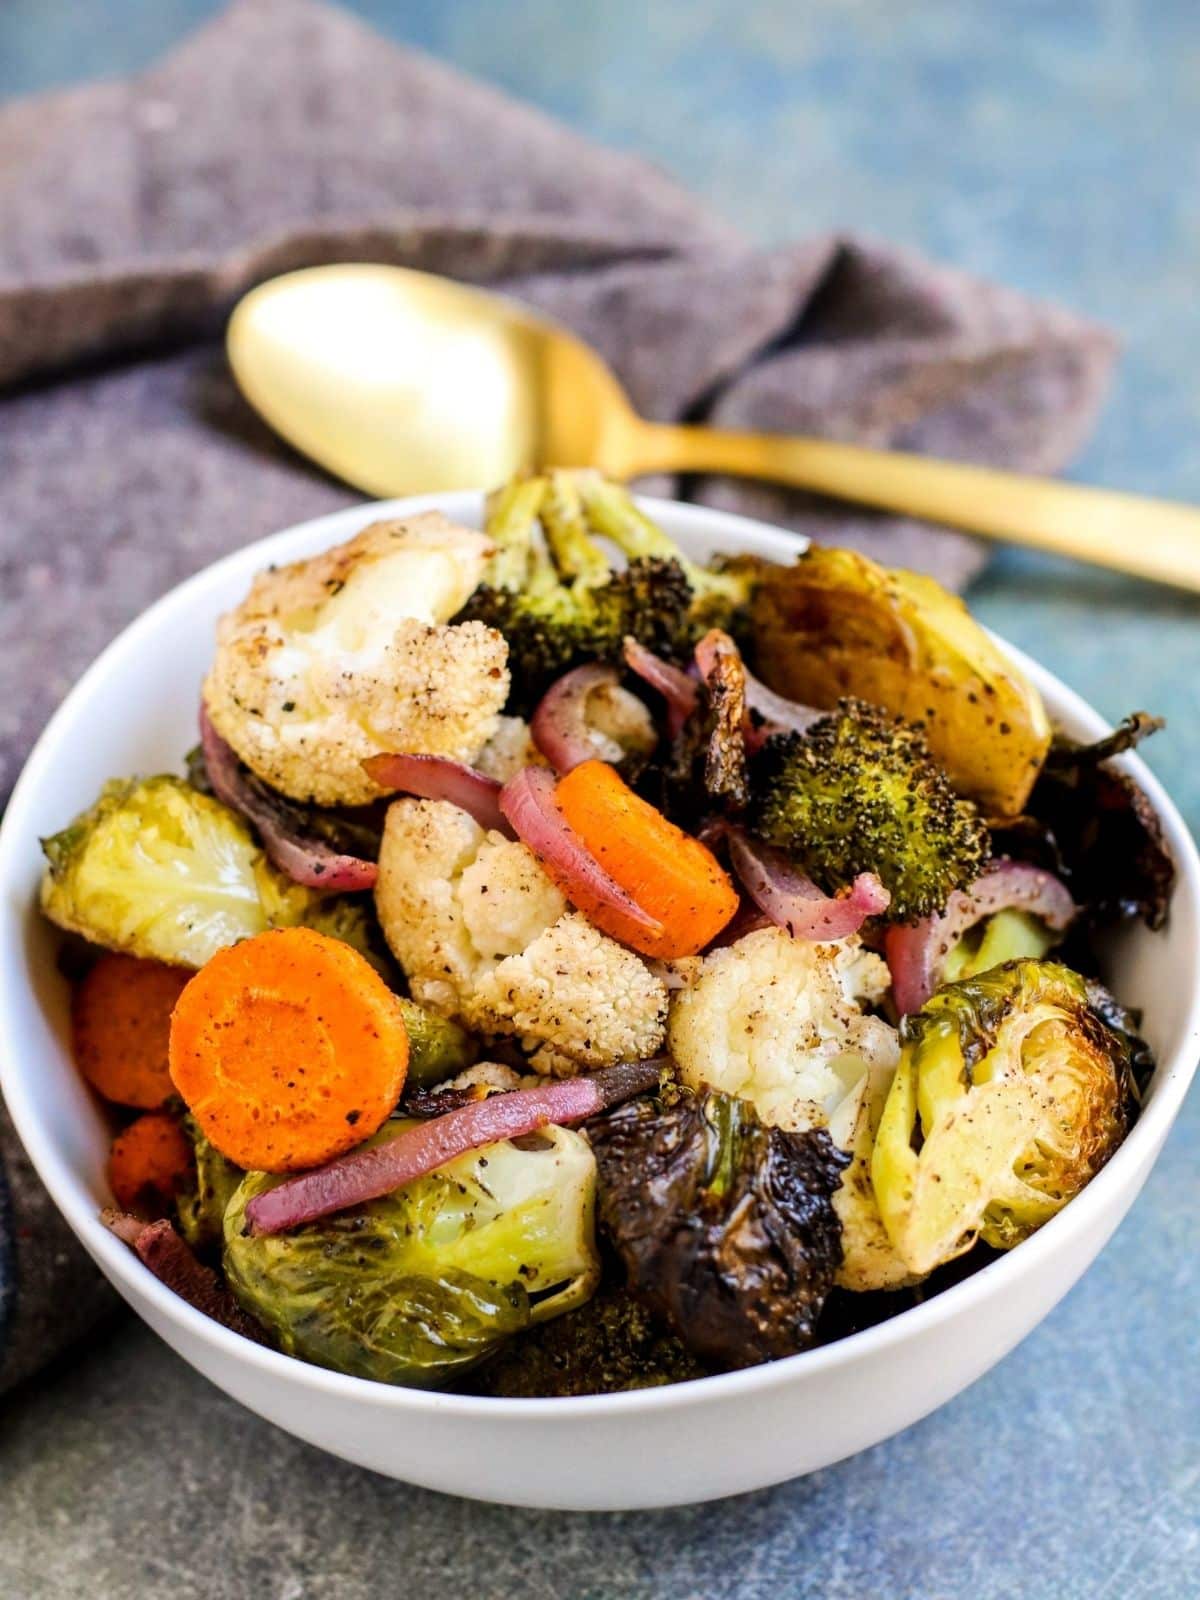 Bowl of roasted Brussels sprouts, carrots, cauliflower, broccoli, and red onions.